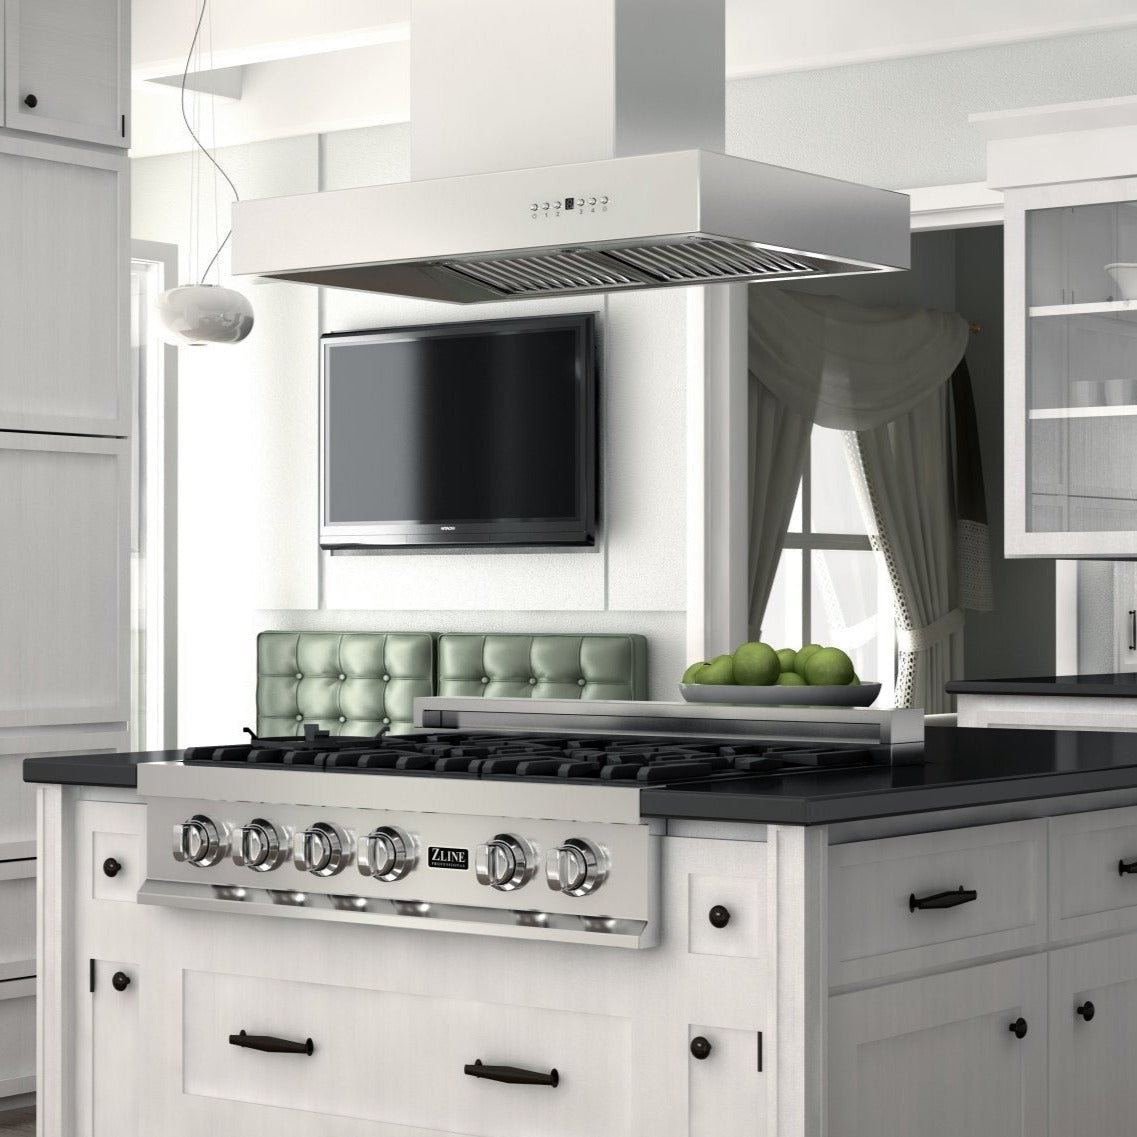 ZLINE Ducted Professional Island Mount Range Hood in Stainless Steel (KECOMi) rendering in a white modern kitchen.